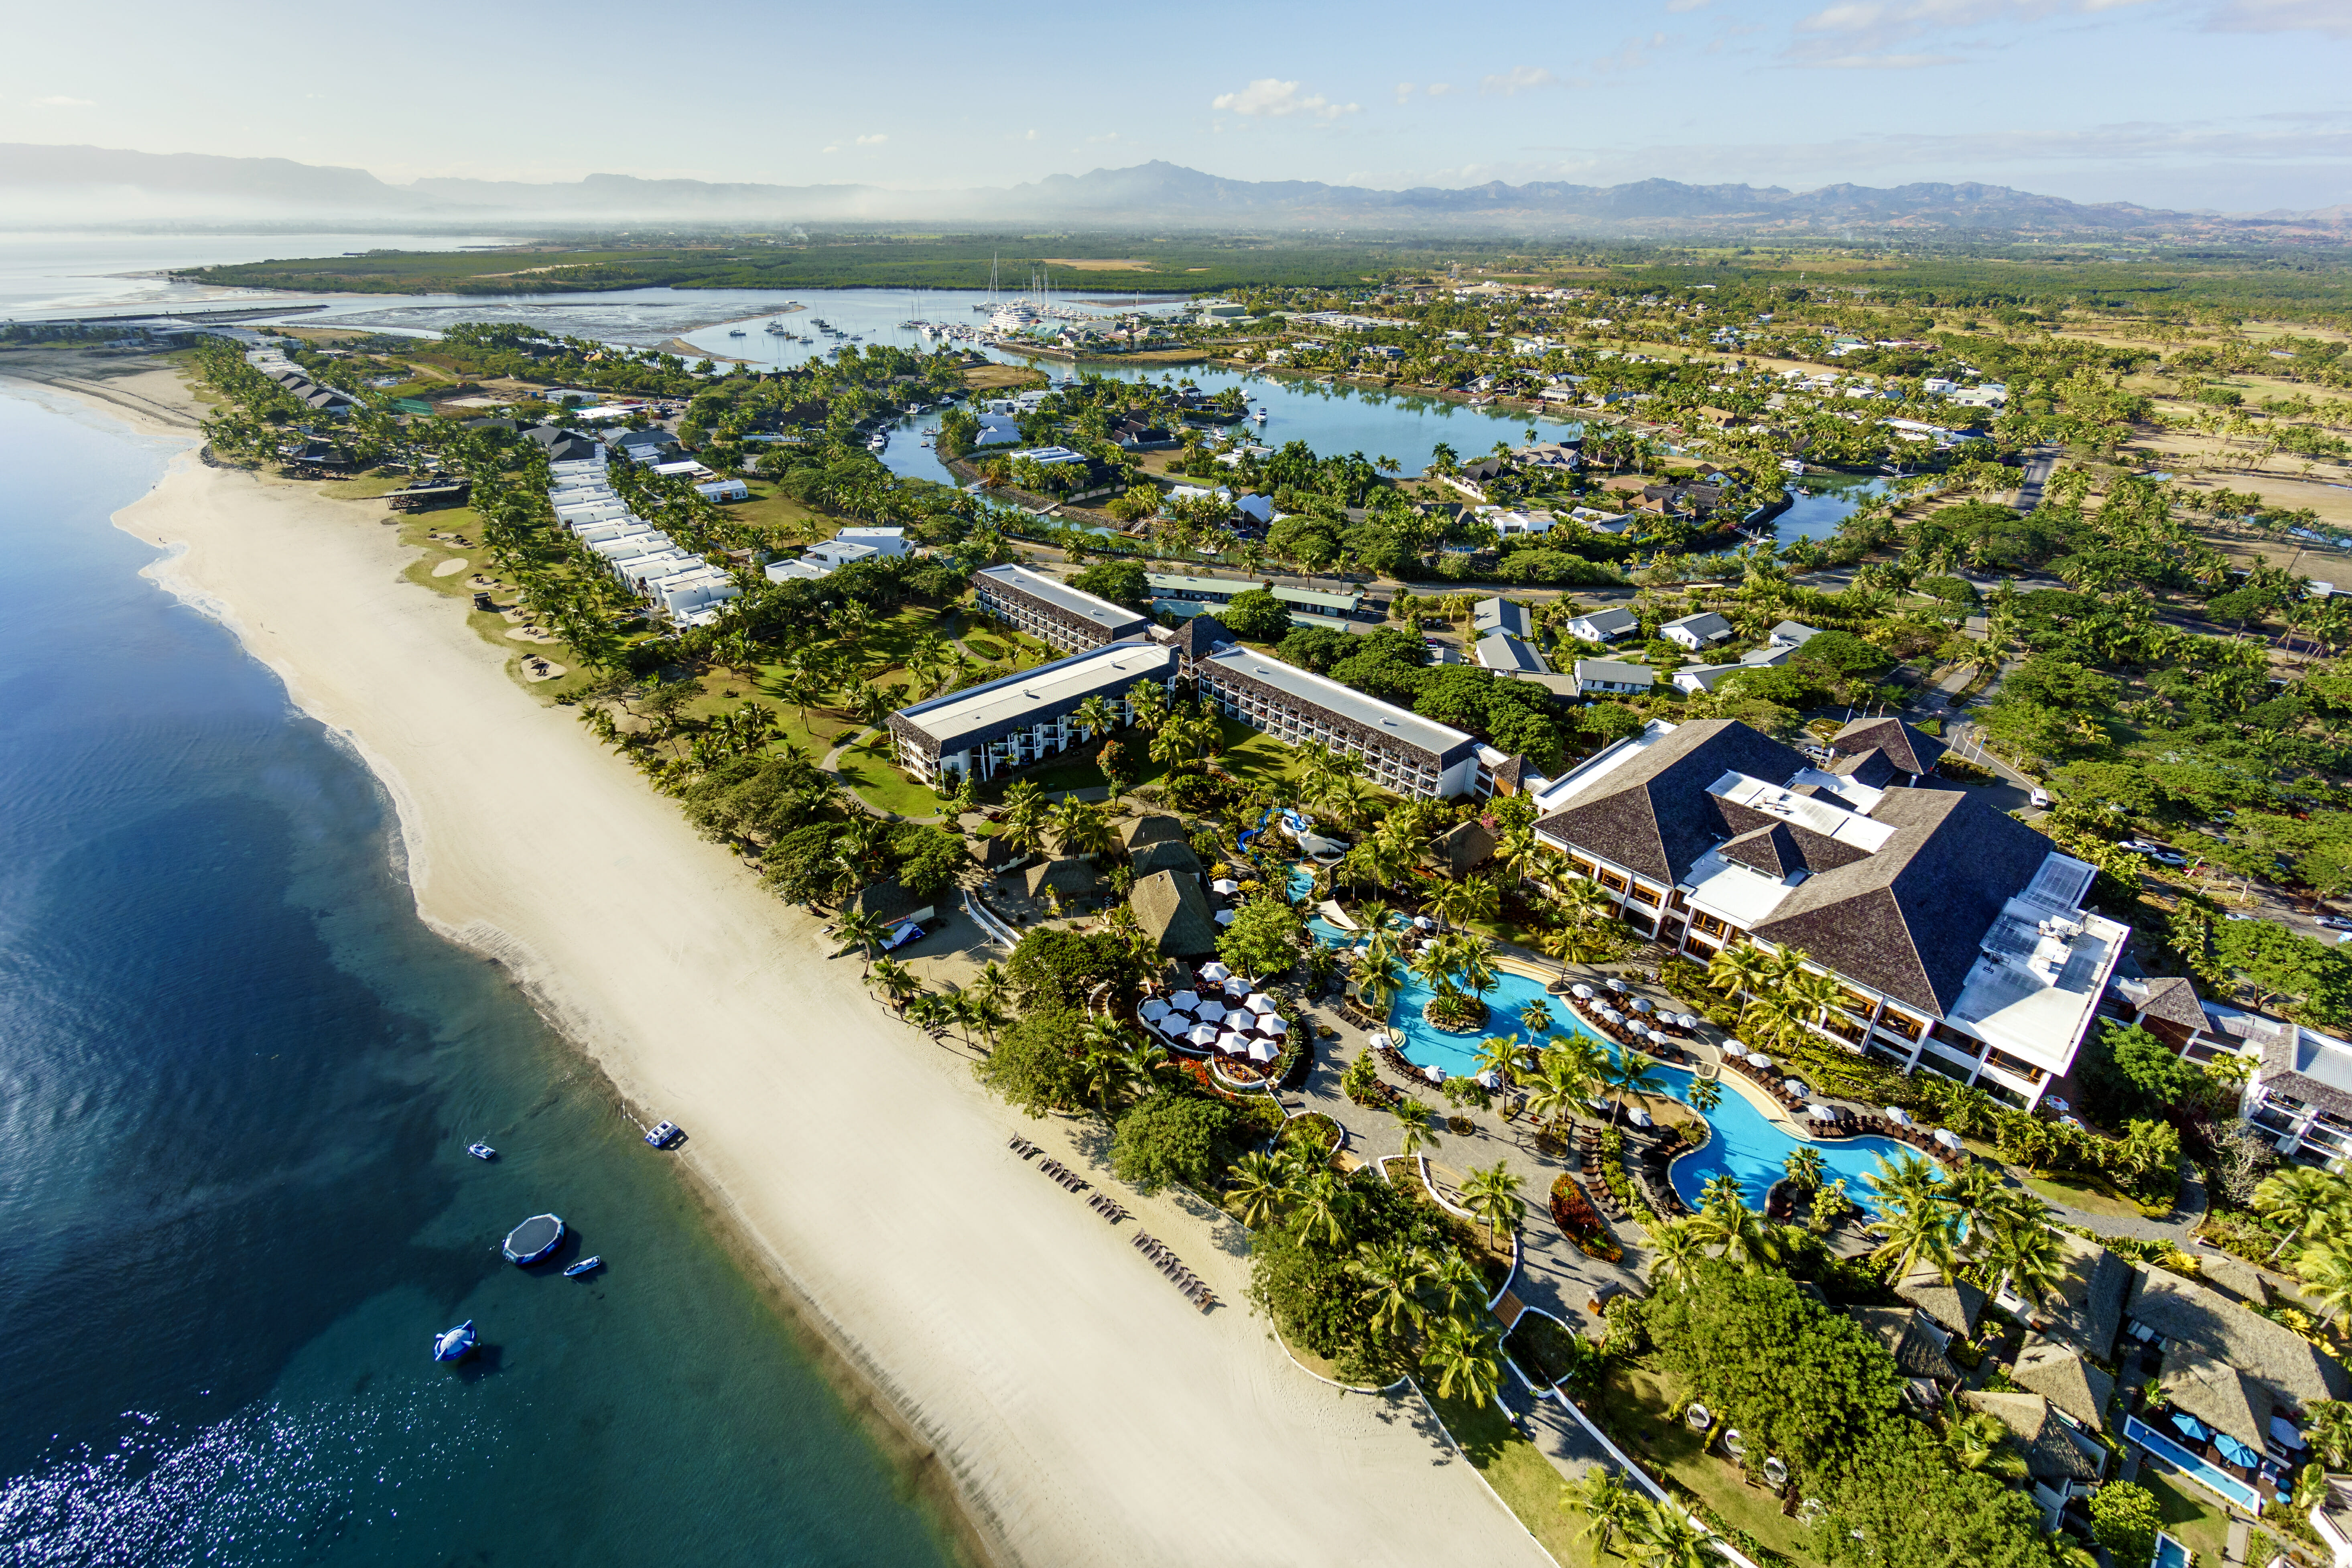 Sofitel Fiji Resort and Spa Credit to Family Travel for the photo